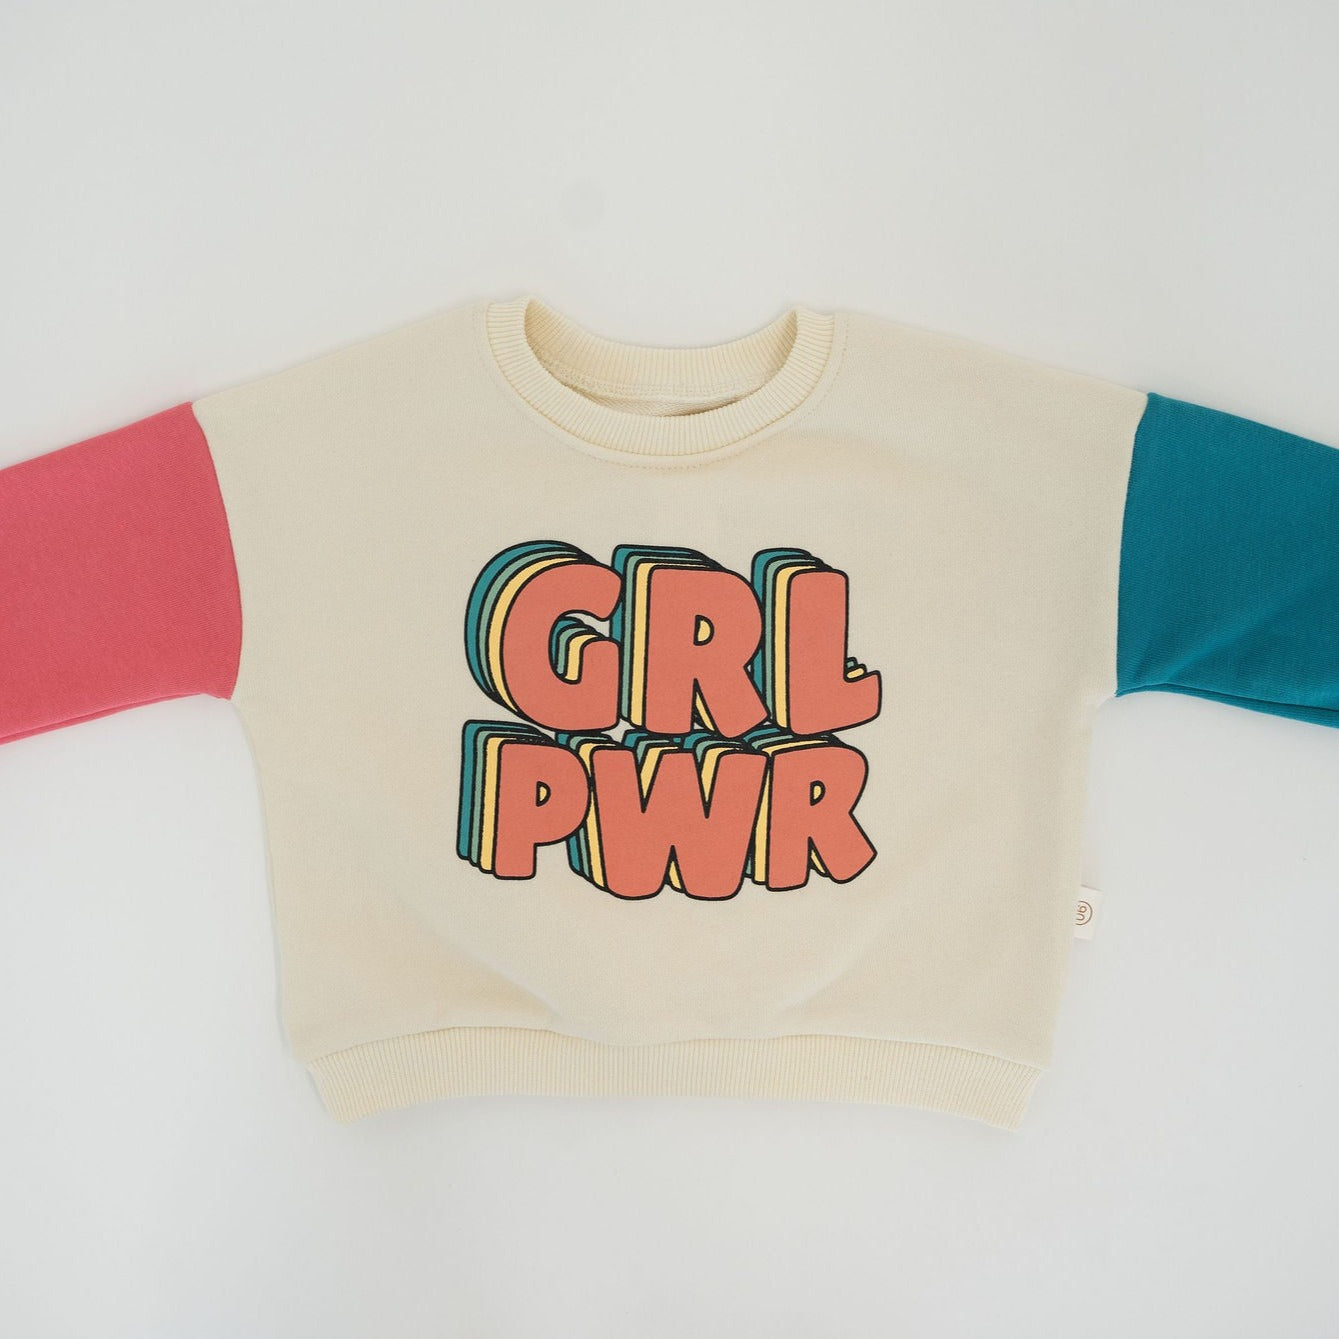 GRL PWR Bubble Sweater and Romper